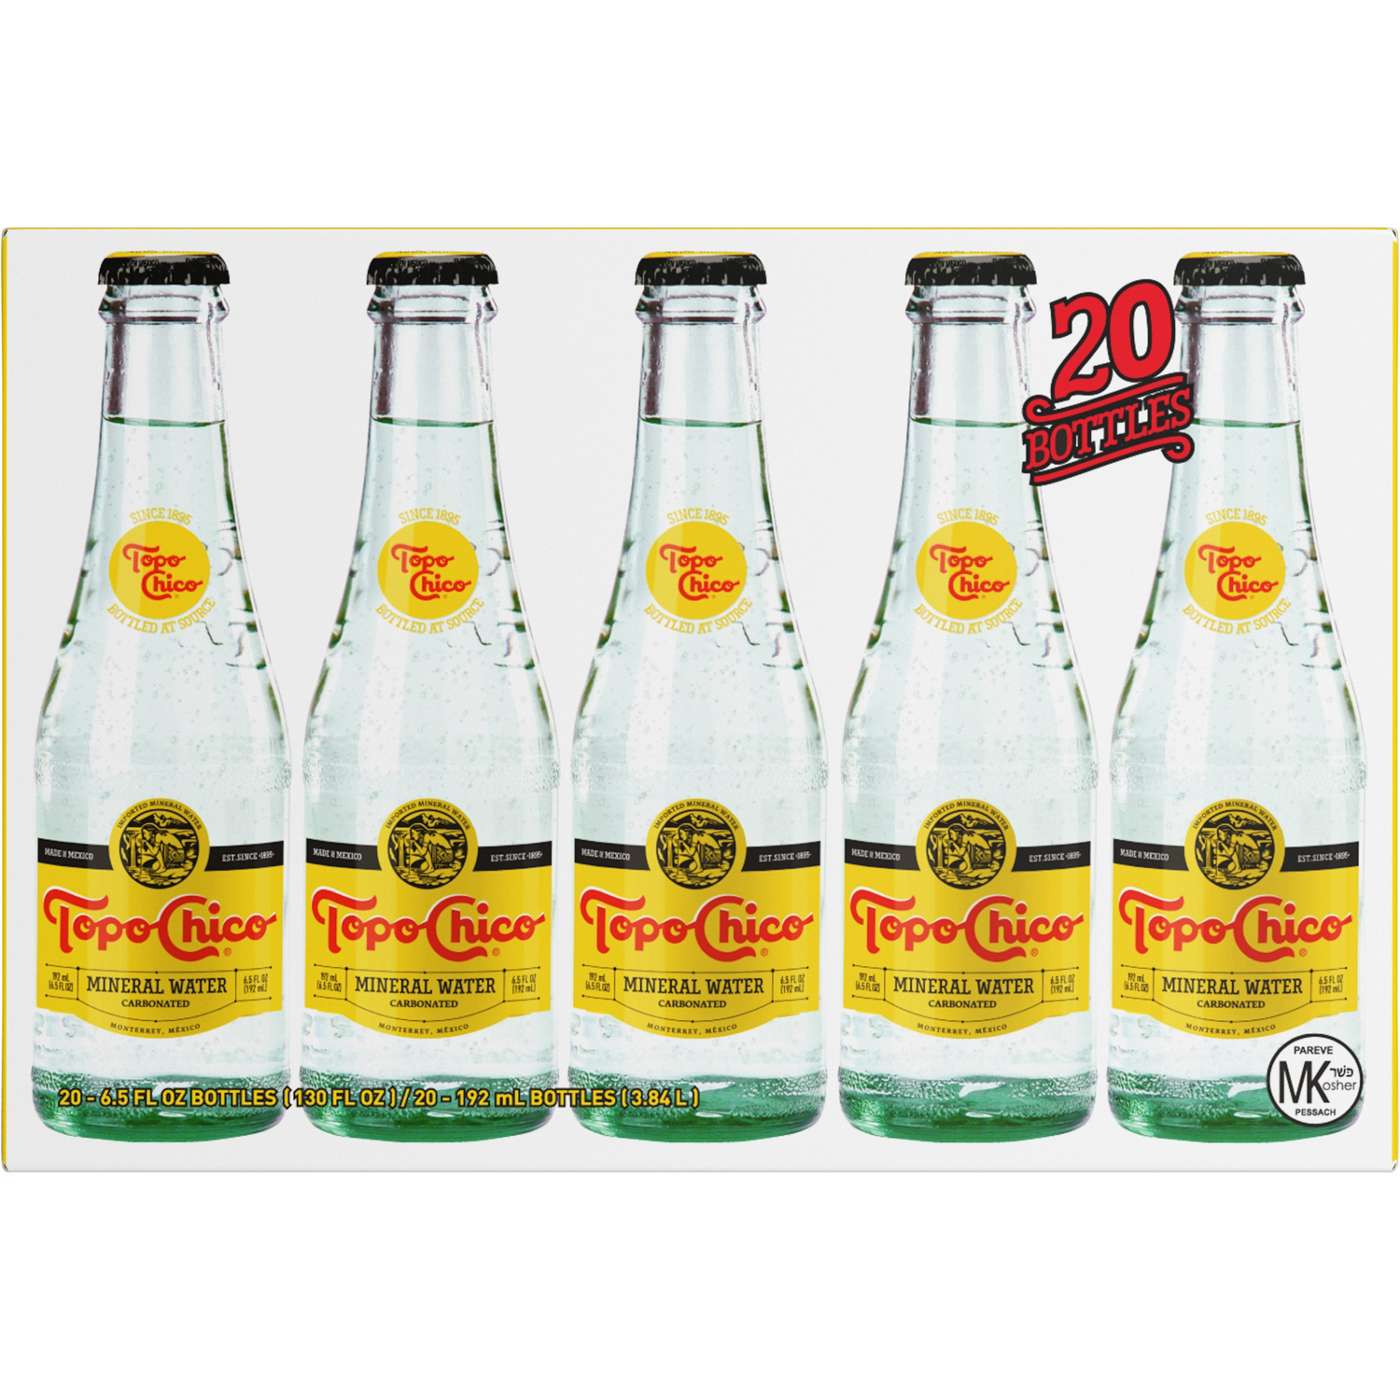 Topo Chico Sparkling Mineral Water 6.5 oz Bottles; image 1 of 3